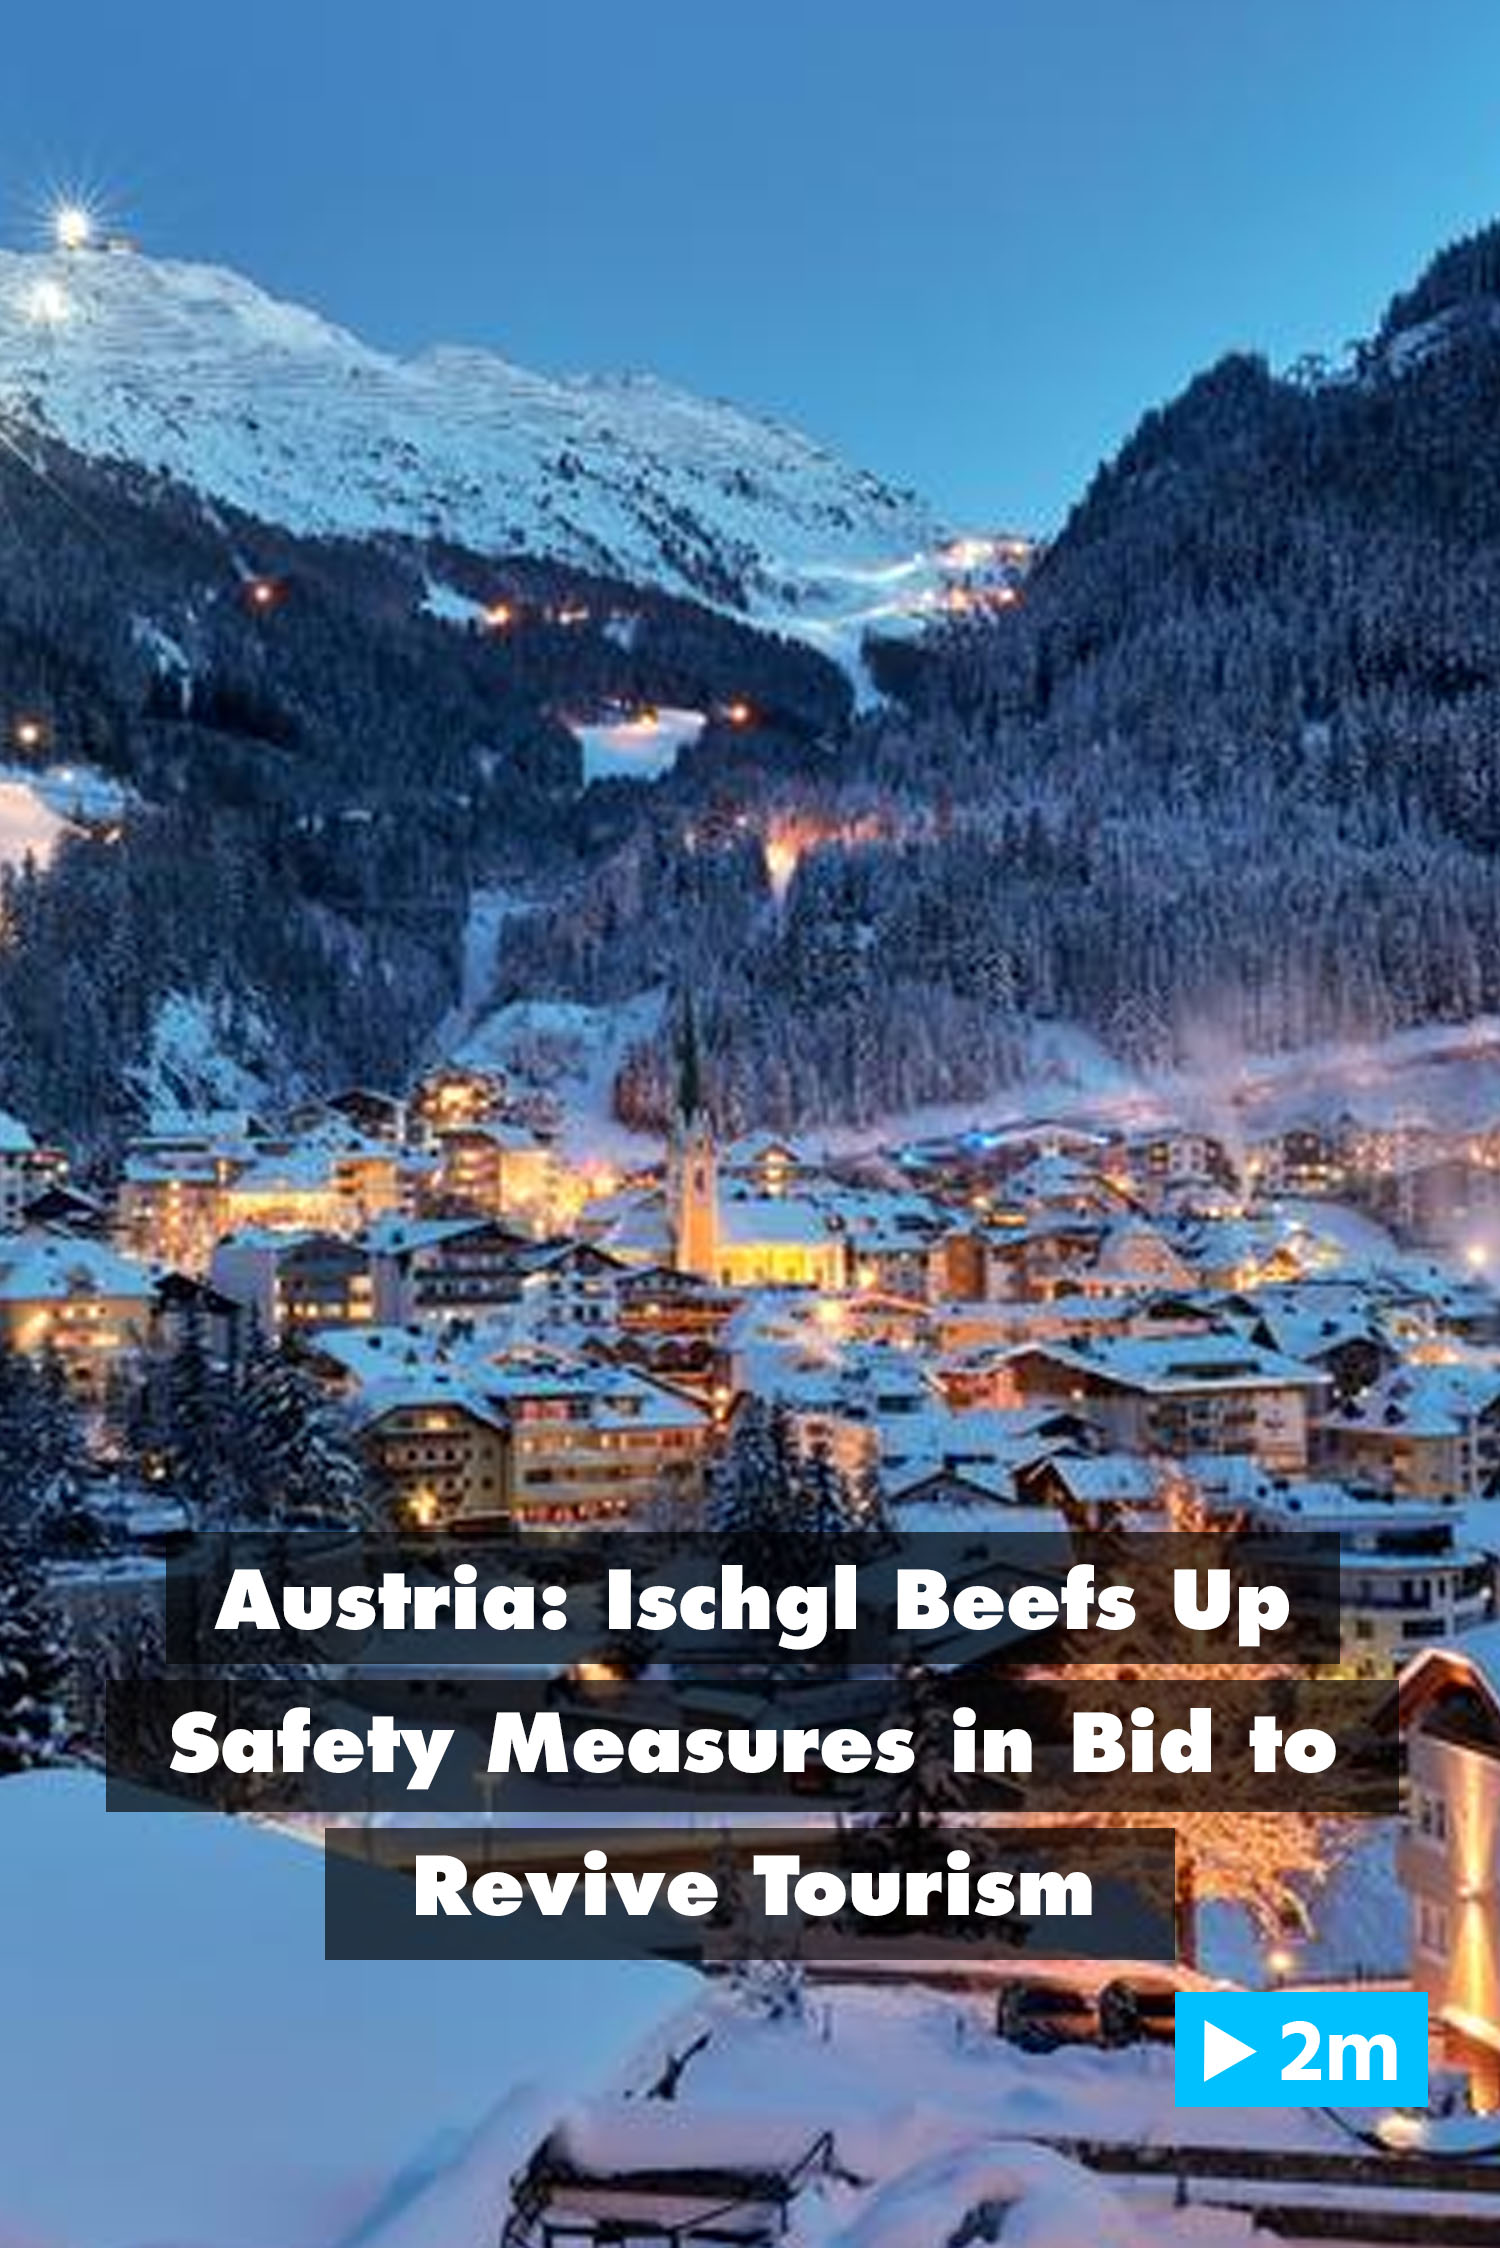 Austria: Ischgl beefs up safety measures in bid to revive tourism